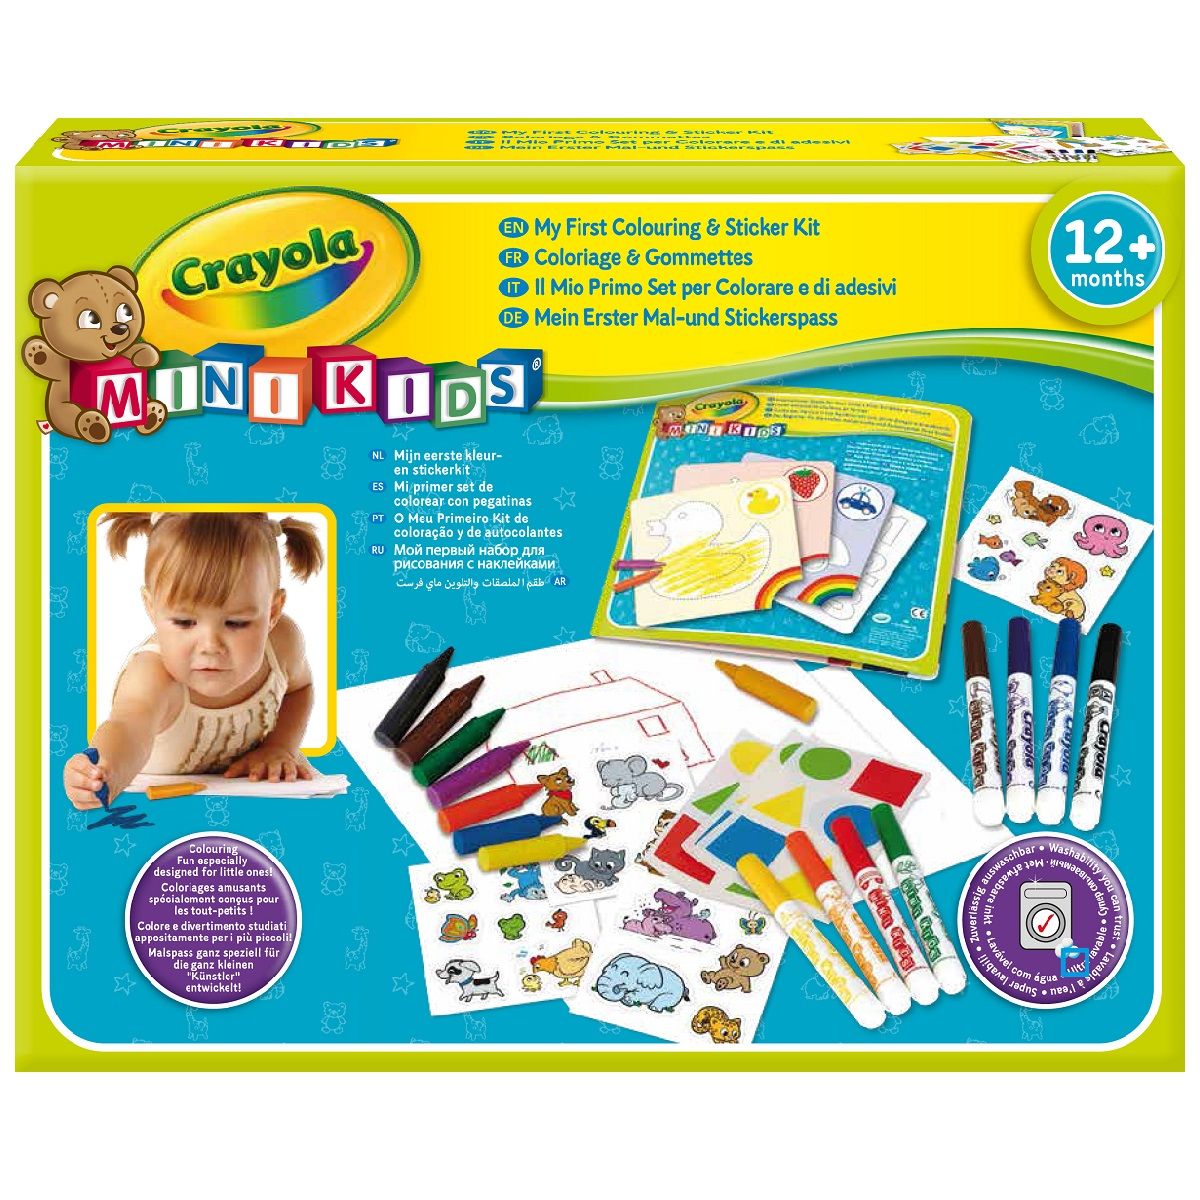 Crayola - 8 Feutres tampons animaux Pas Cher